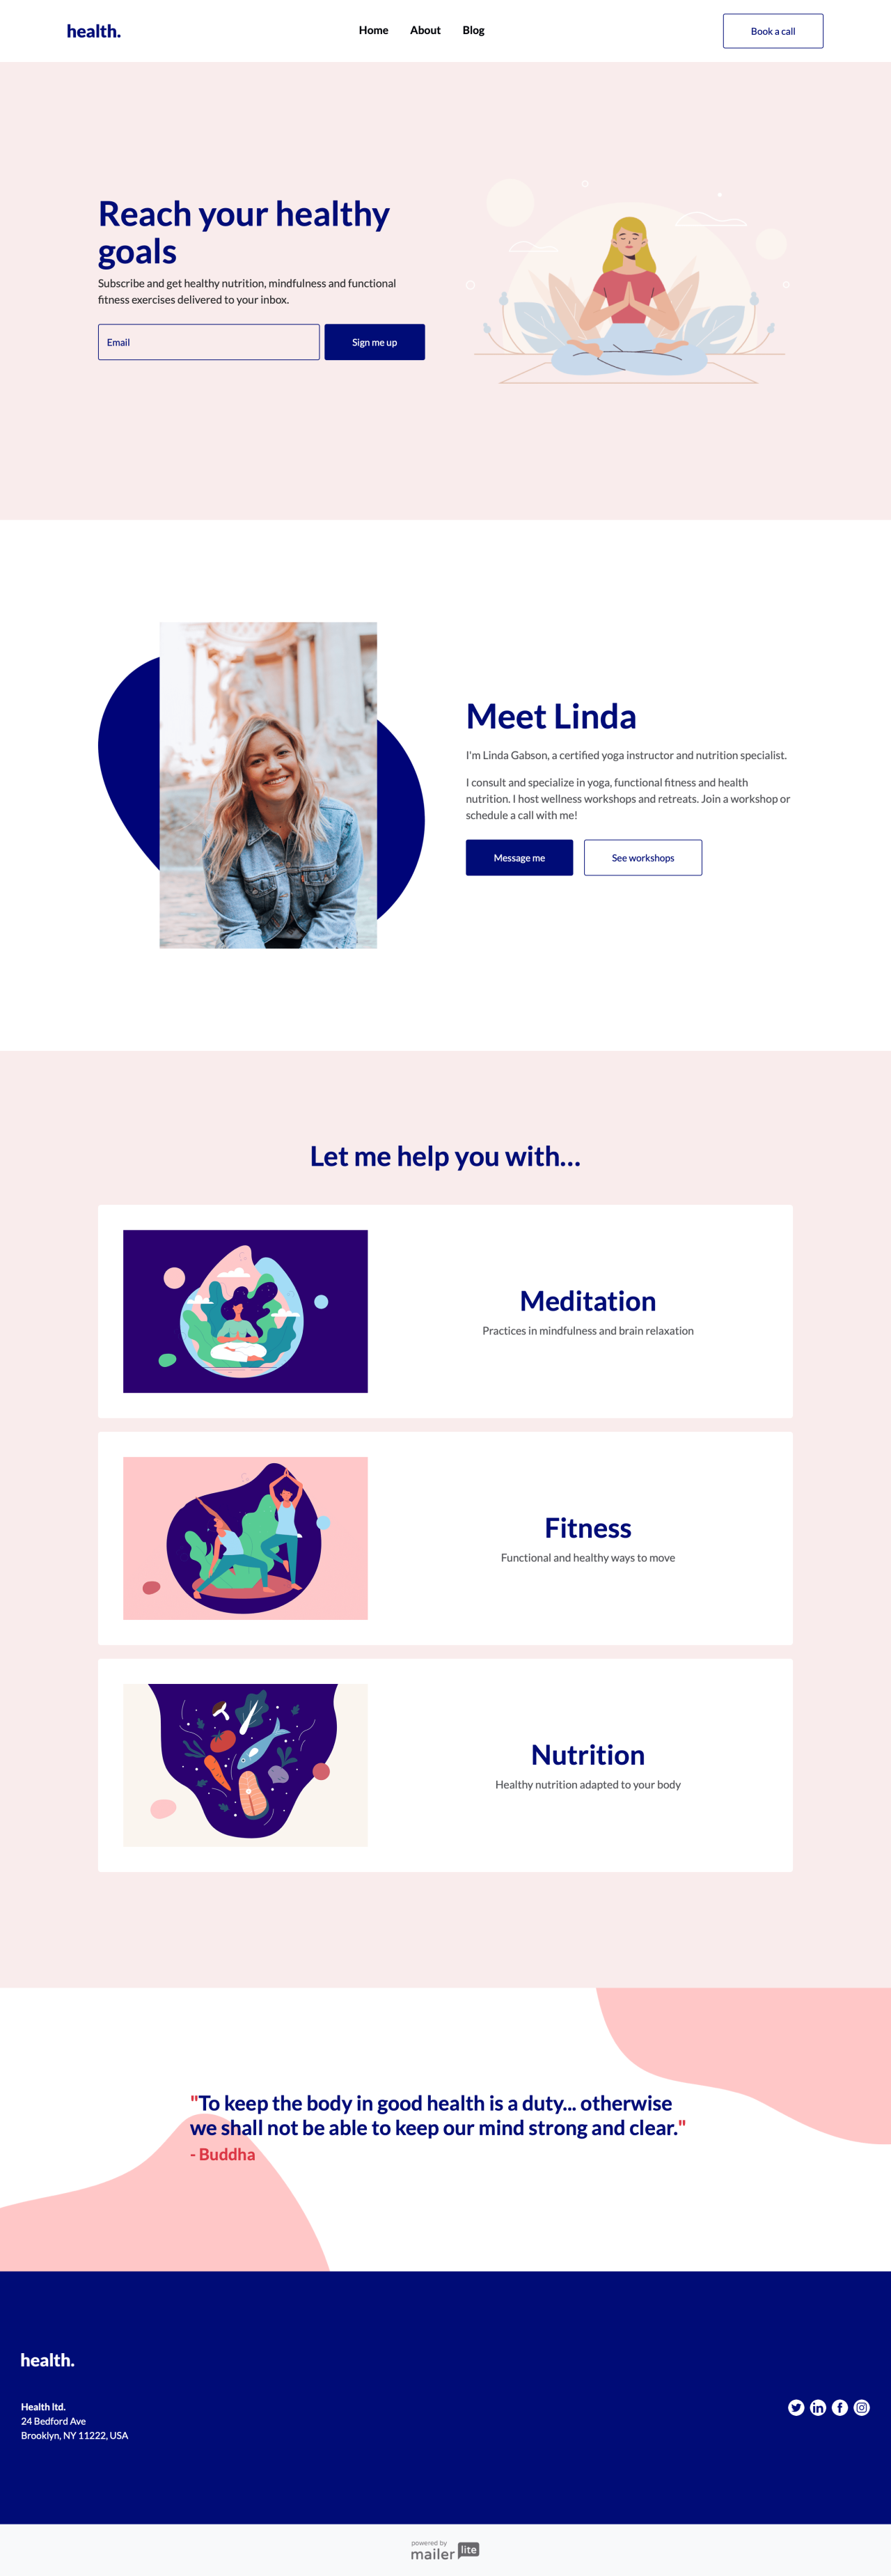 Health coach template - Made by MailerLite